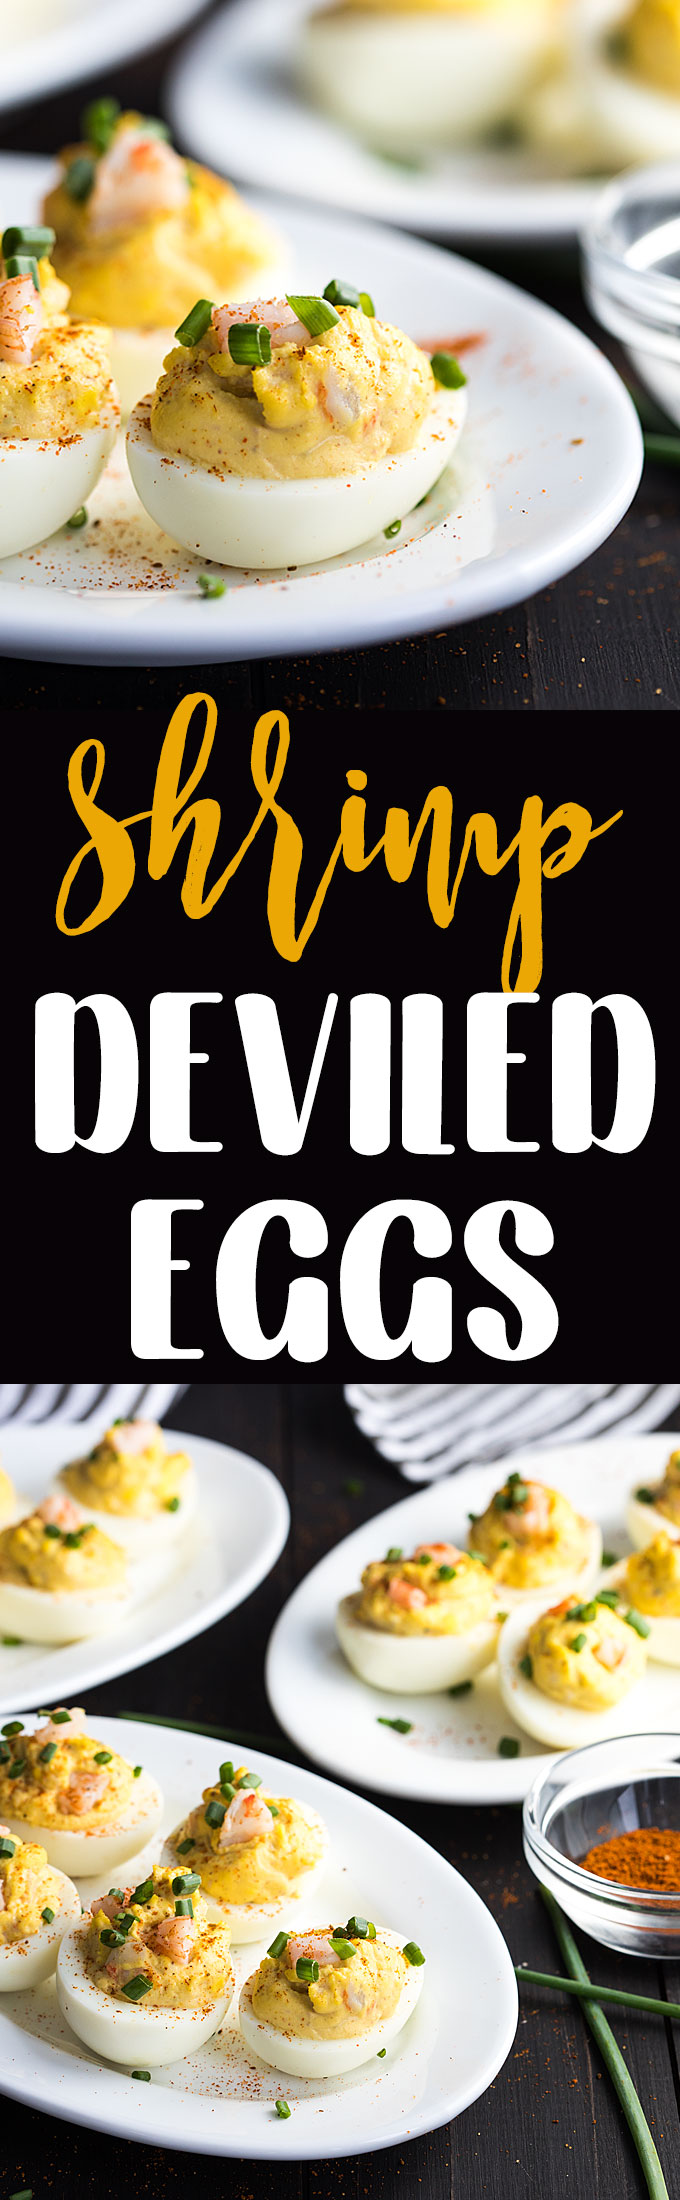 A two image vertical collage of shrimp deviled eggs with overlay text in the center.